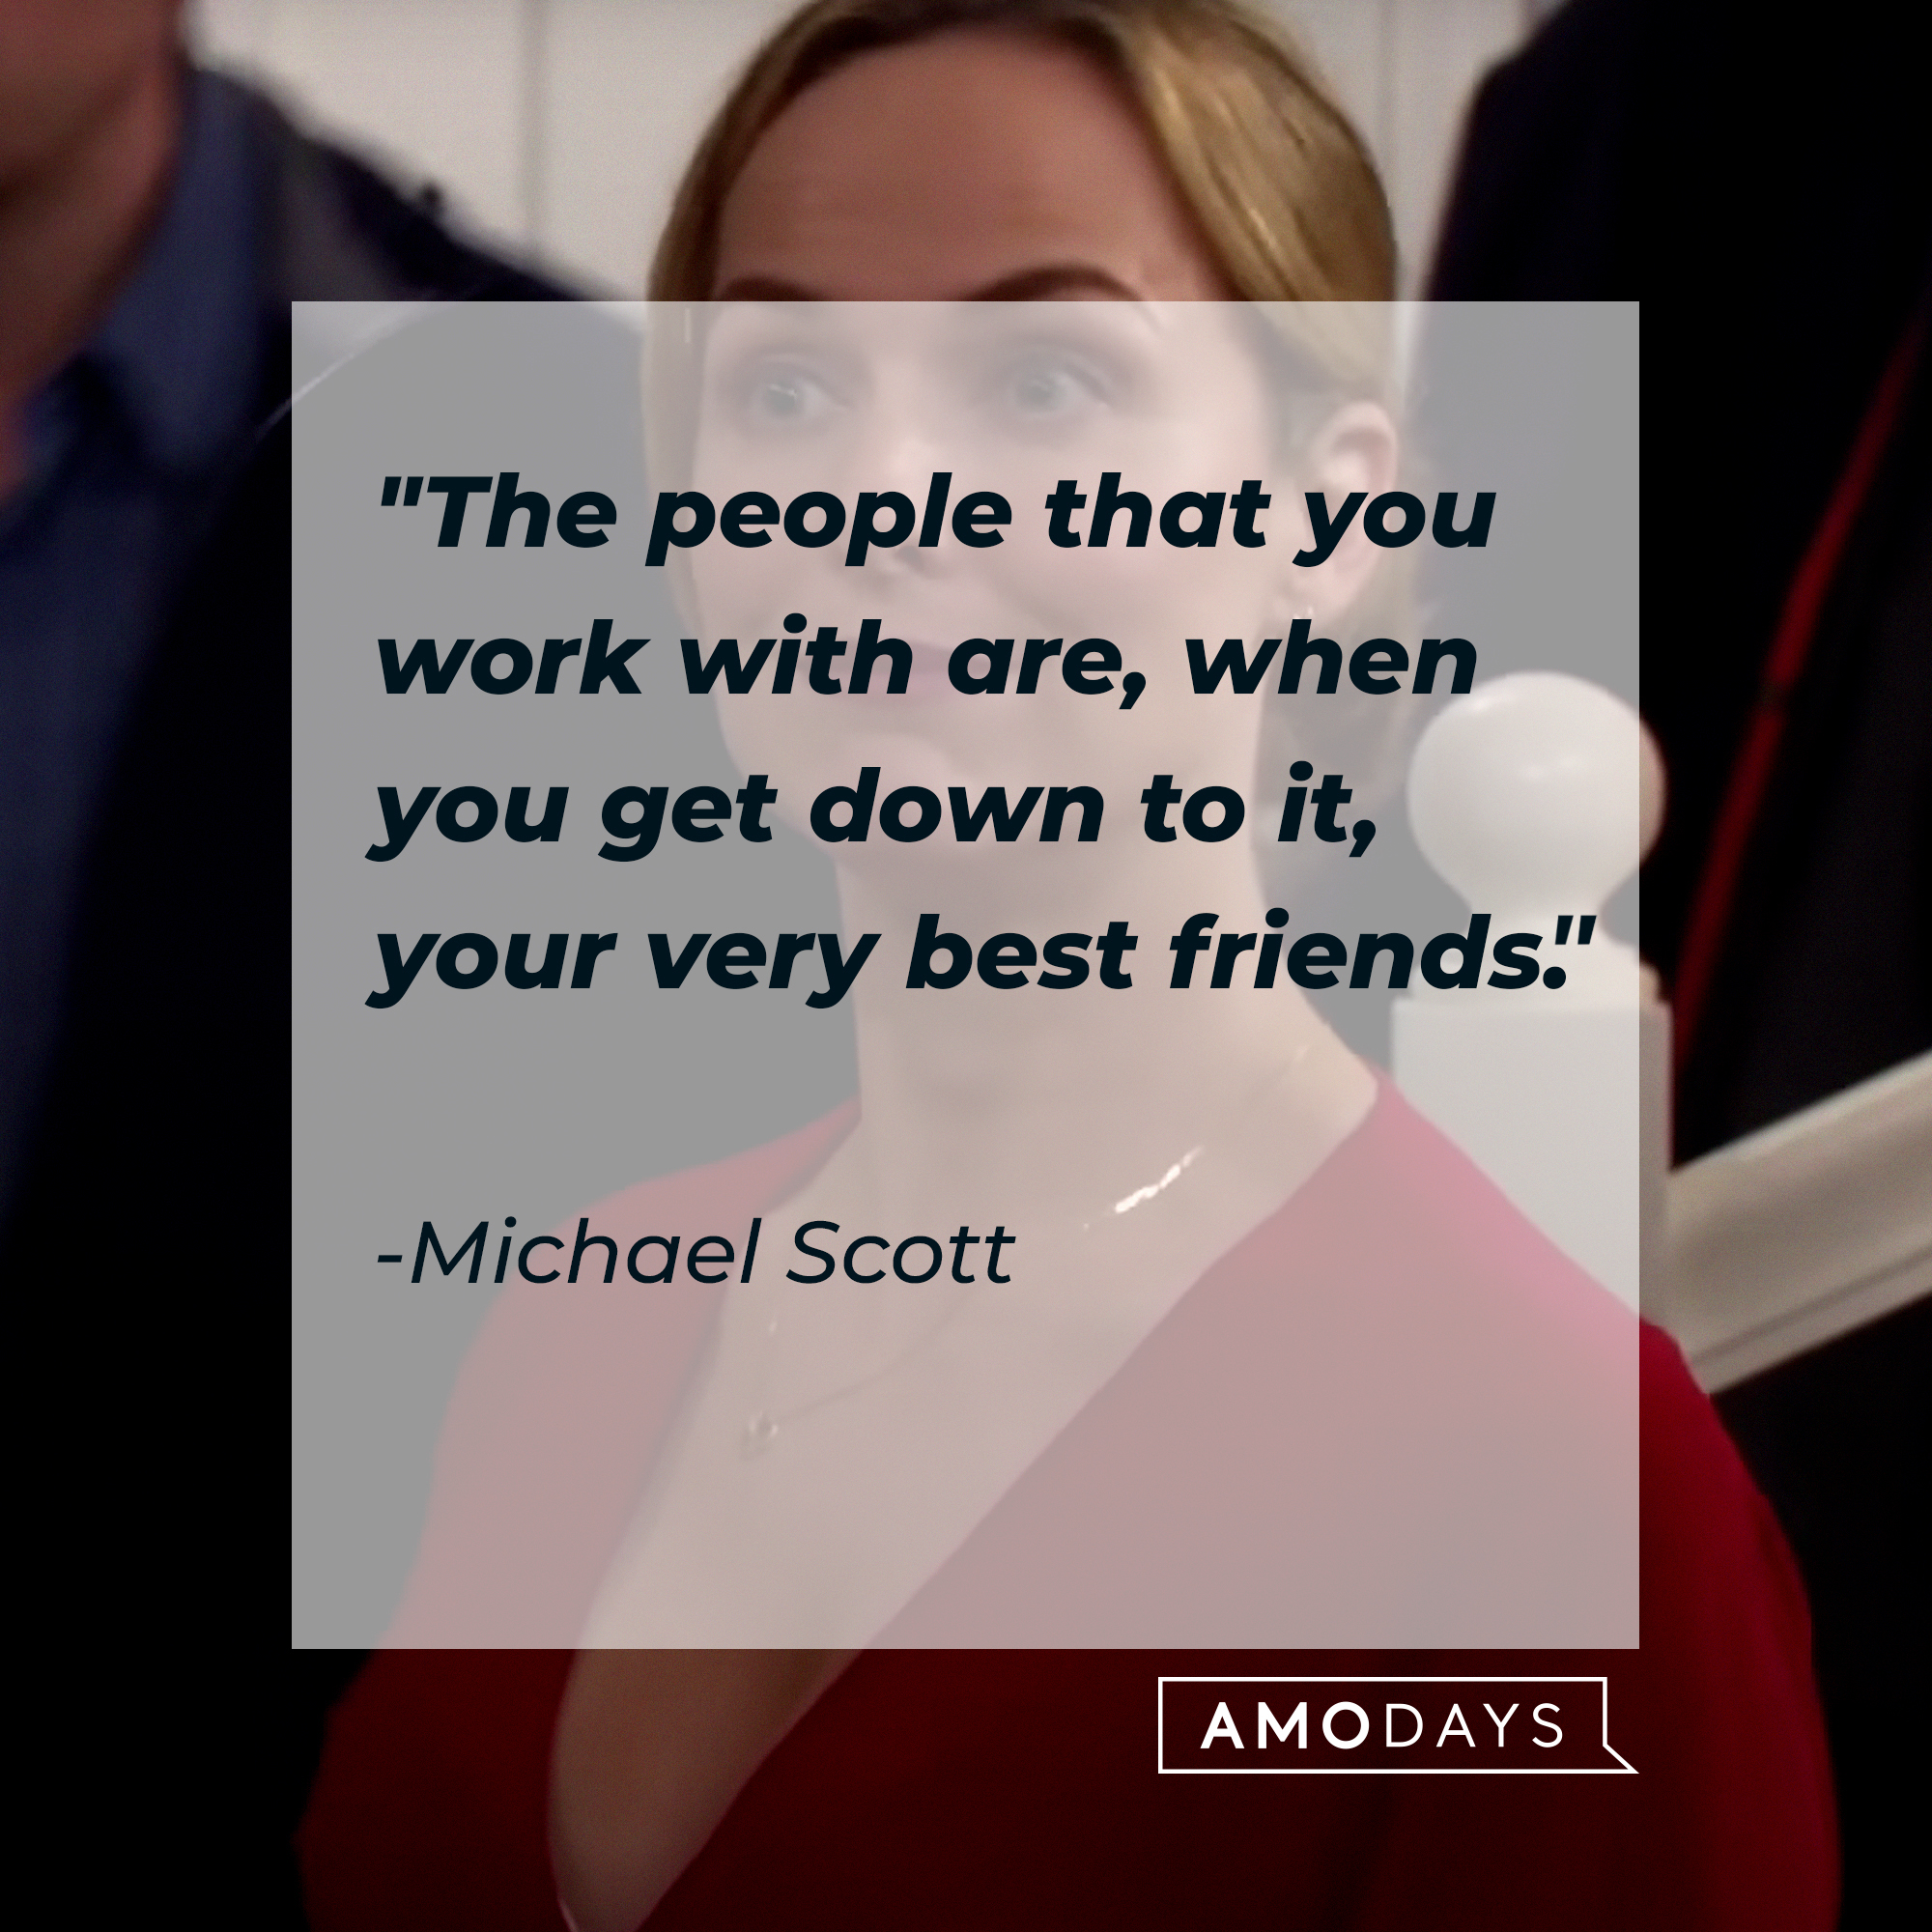 Michael Scott's quote: "The people that you work with are, when you get down to it, your very best friends" | Source: Youtube.com/TheOffice